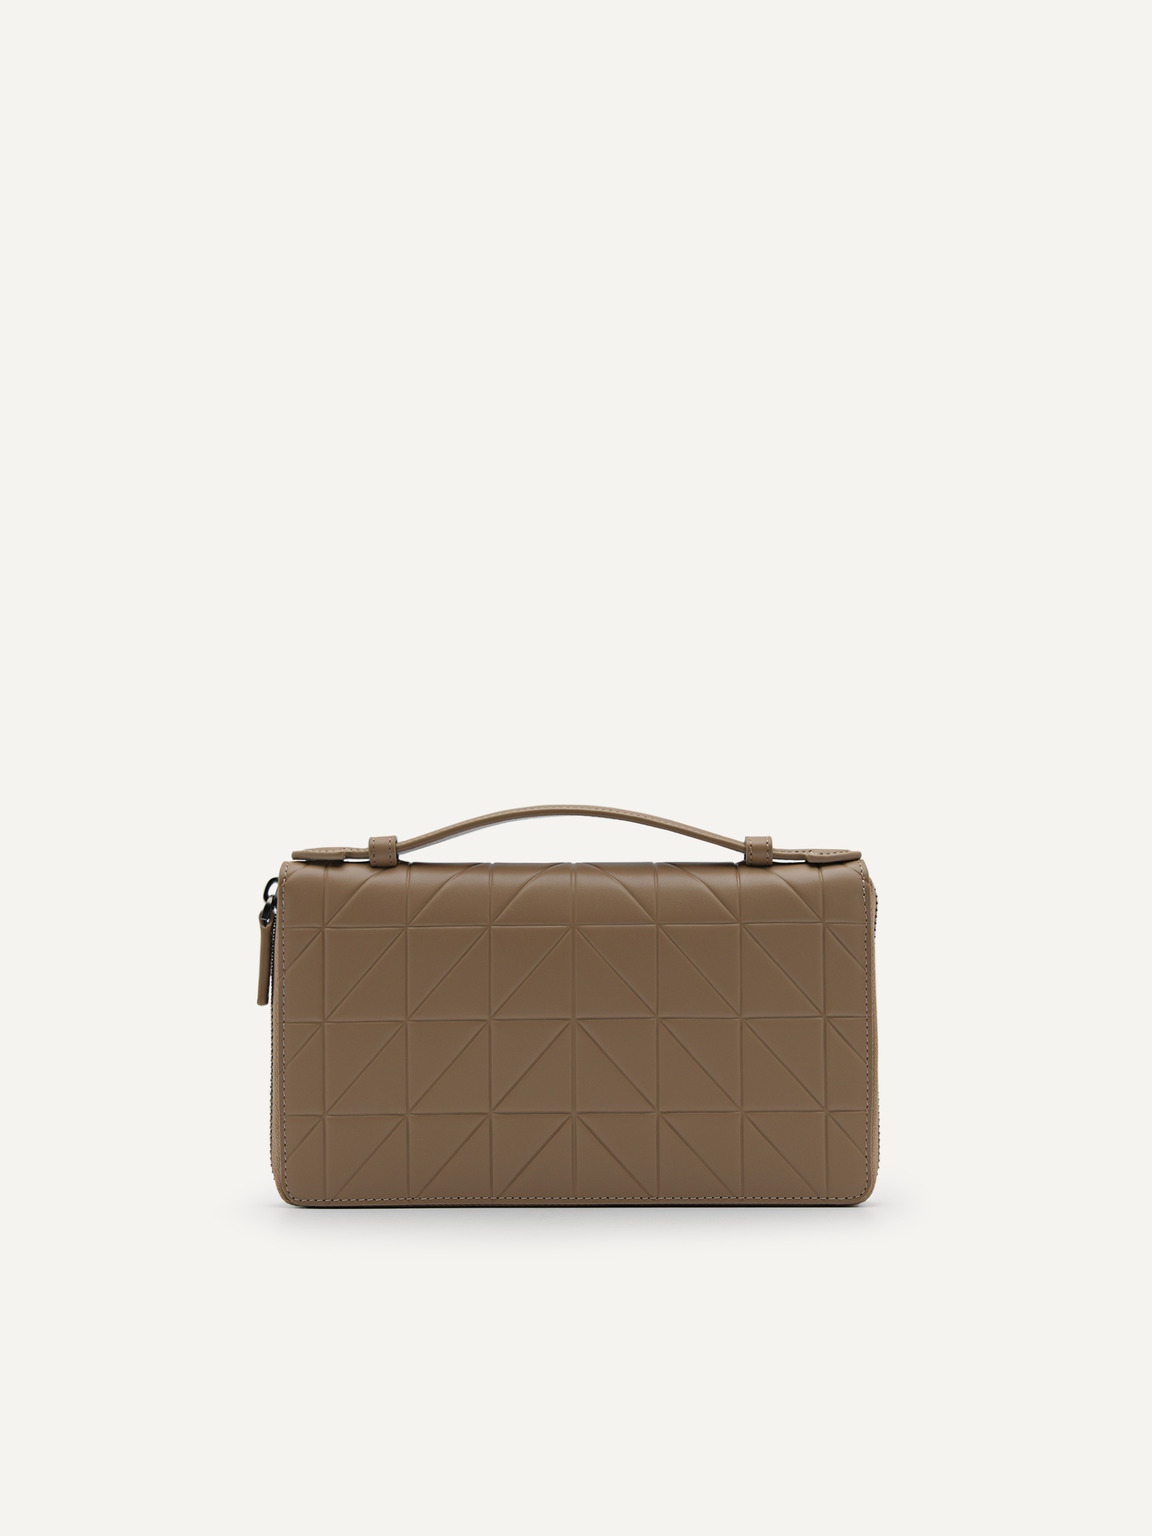 PEDRO Icon Leather Travel Organiser in Pixel, Taupe